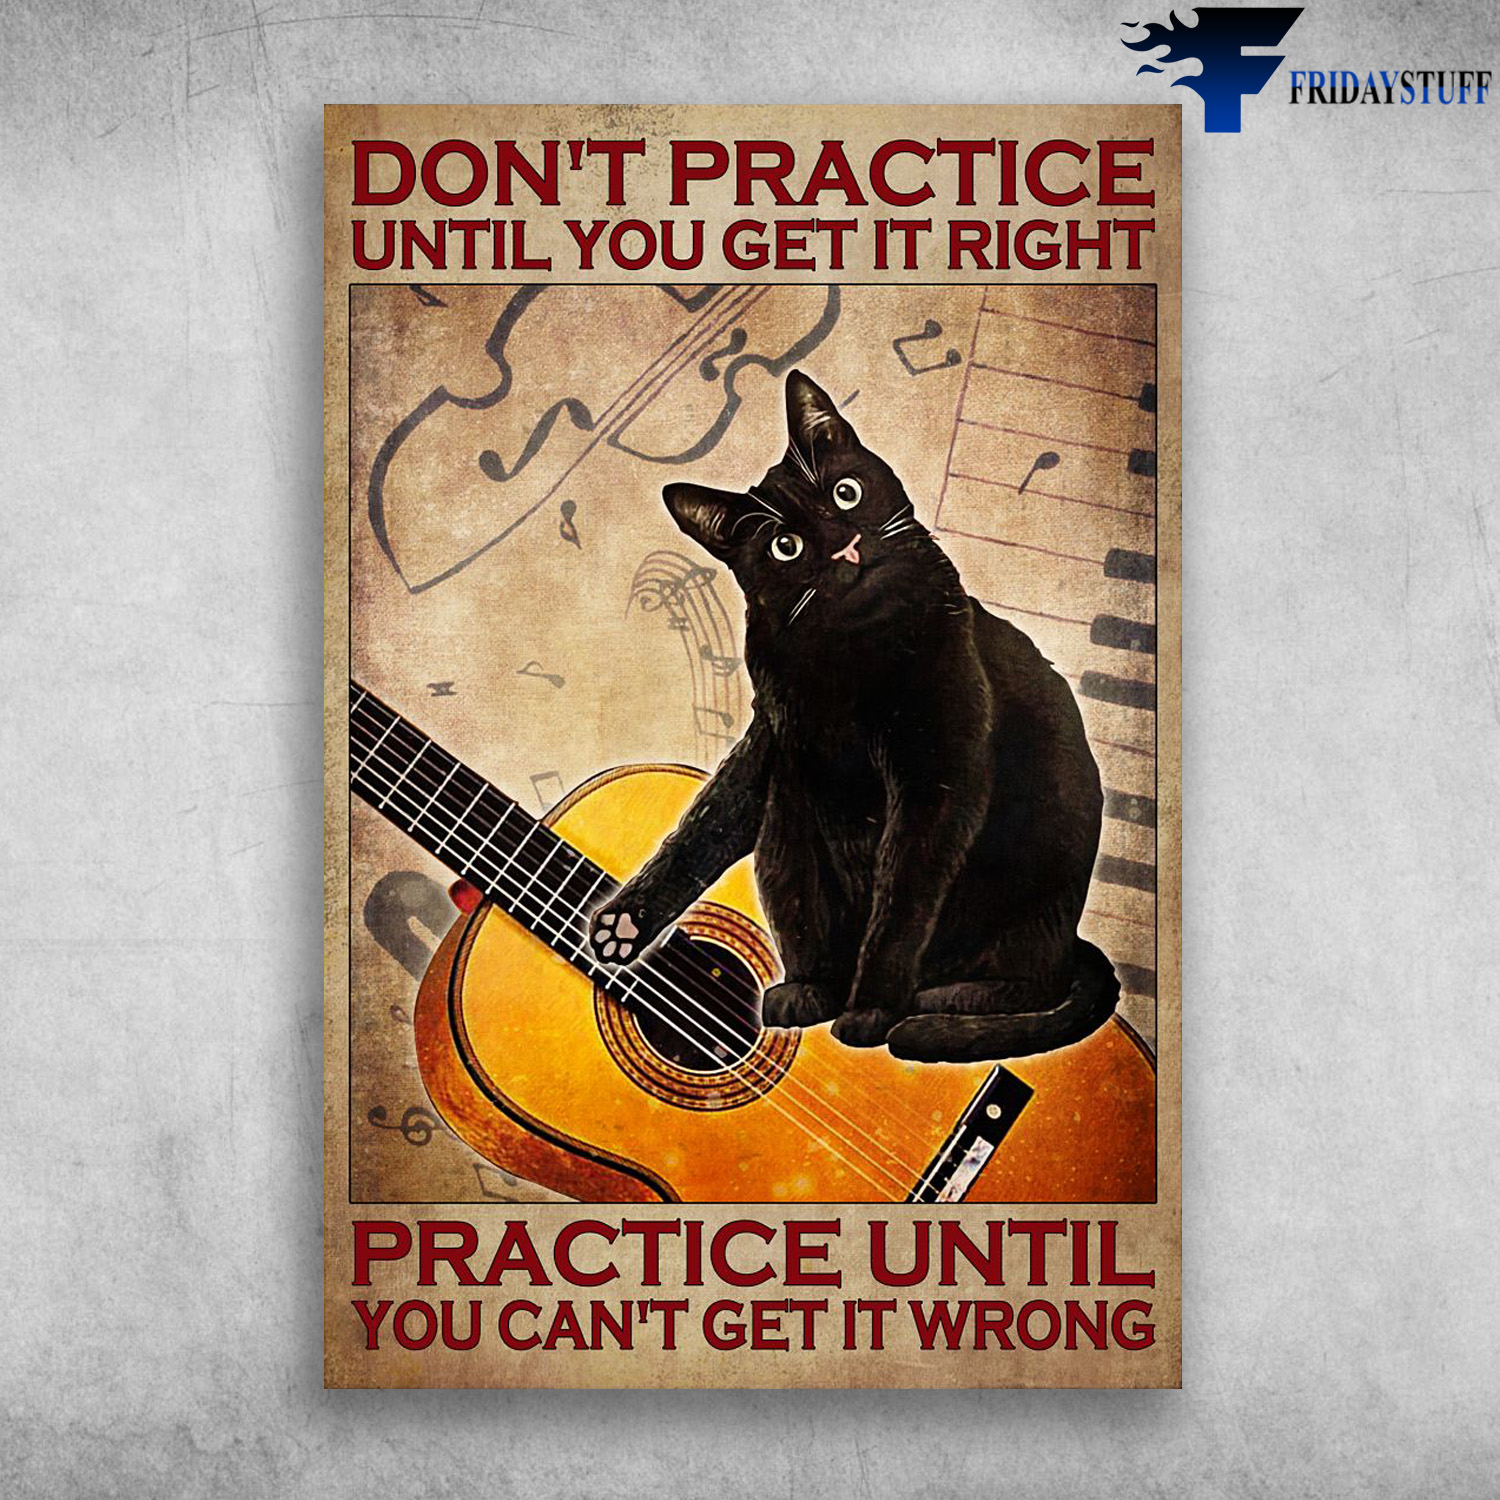 Black Cat And The Guitar - Don't Practice Until You Get It Right, Practice Until You Can't Get It Wrong